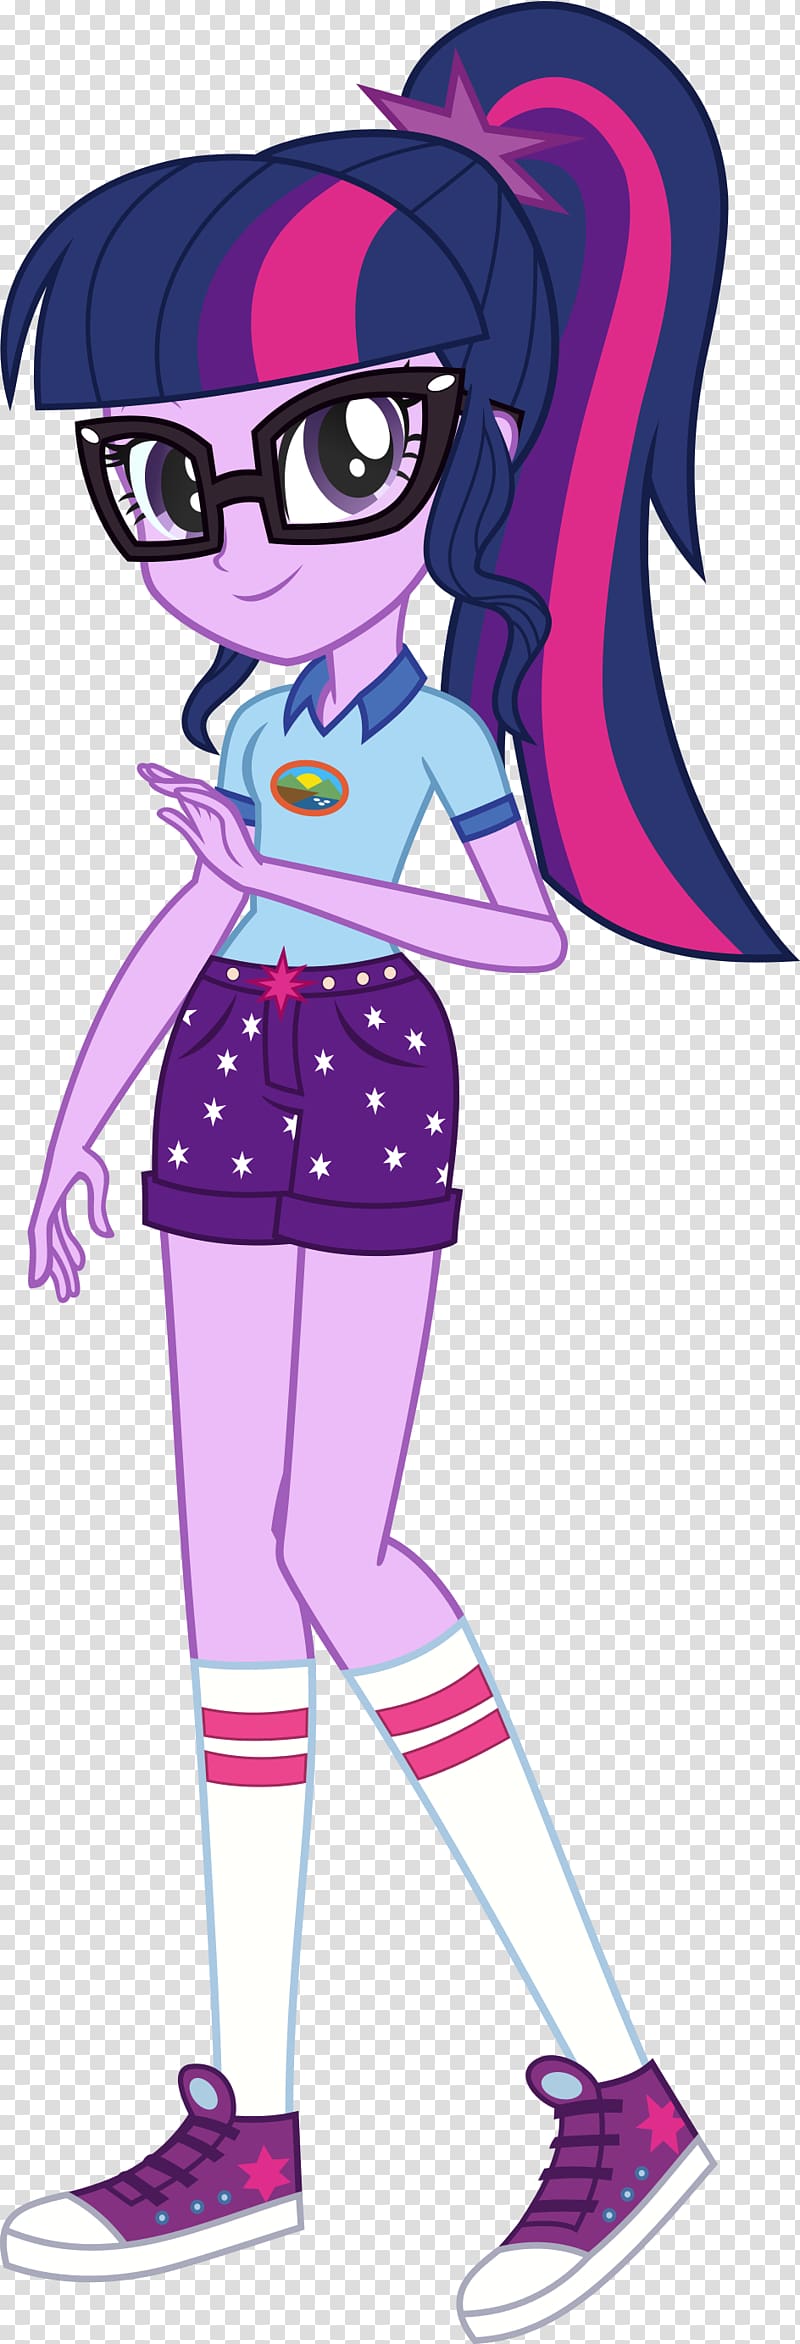 Twilight Sparkle Rarity Rainbow Dash Applejack My Little Pony: Equestria Girls, others transparent background PNG clipart